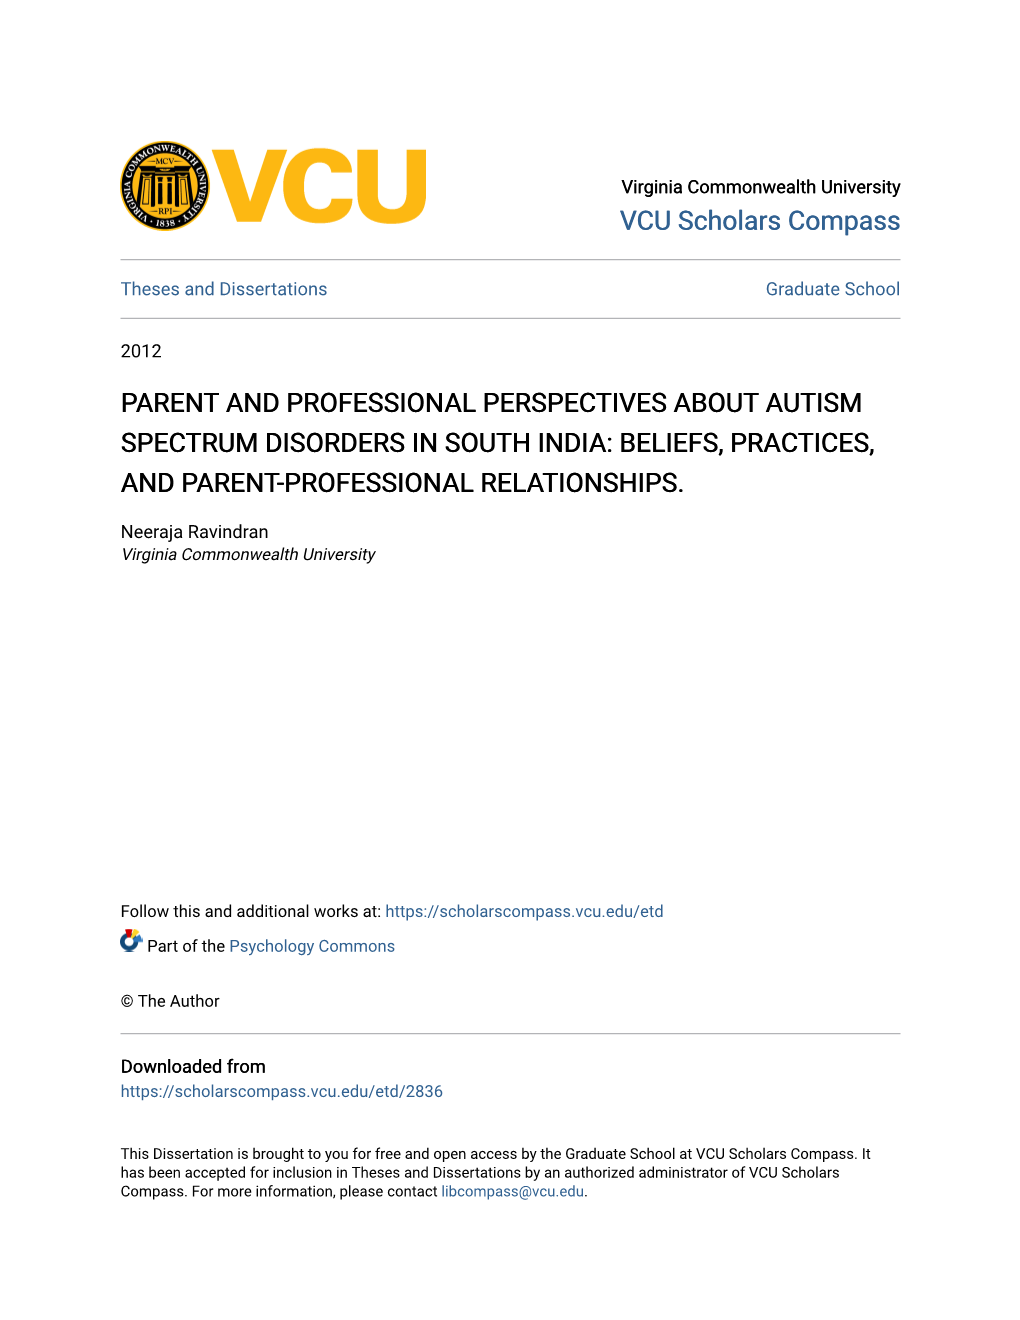 Parent and Professional Perspectives About Autism Spectrum Disorders in South India: Beliefs, Practices, and Parent-Professional Relationships